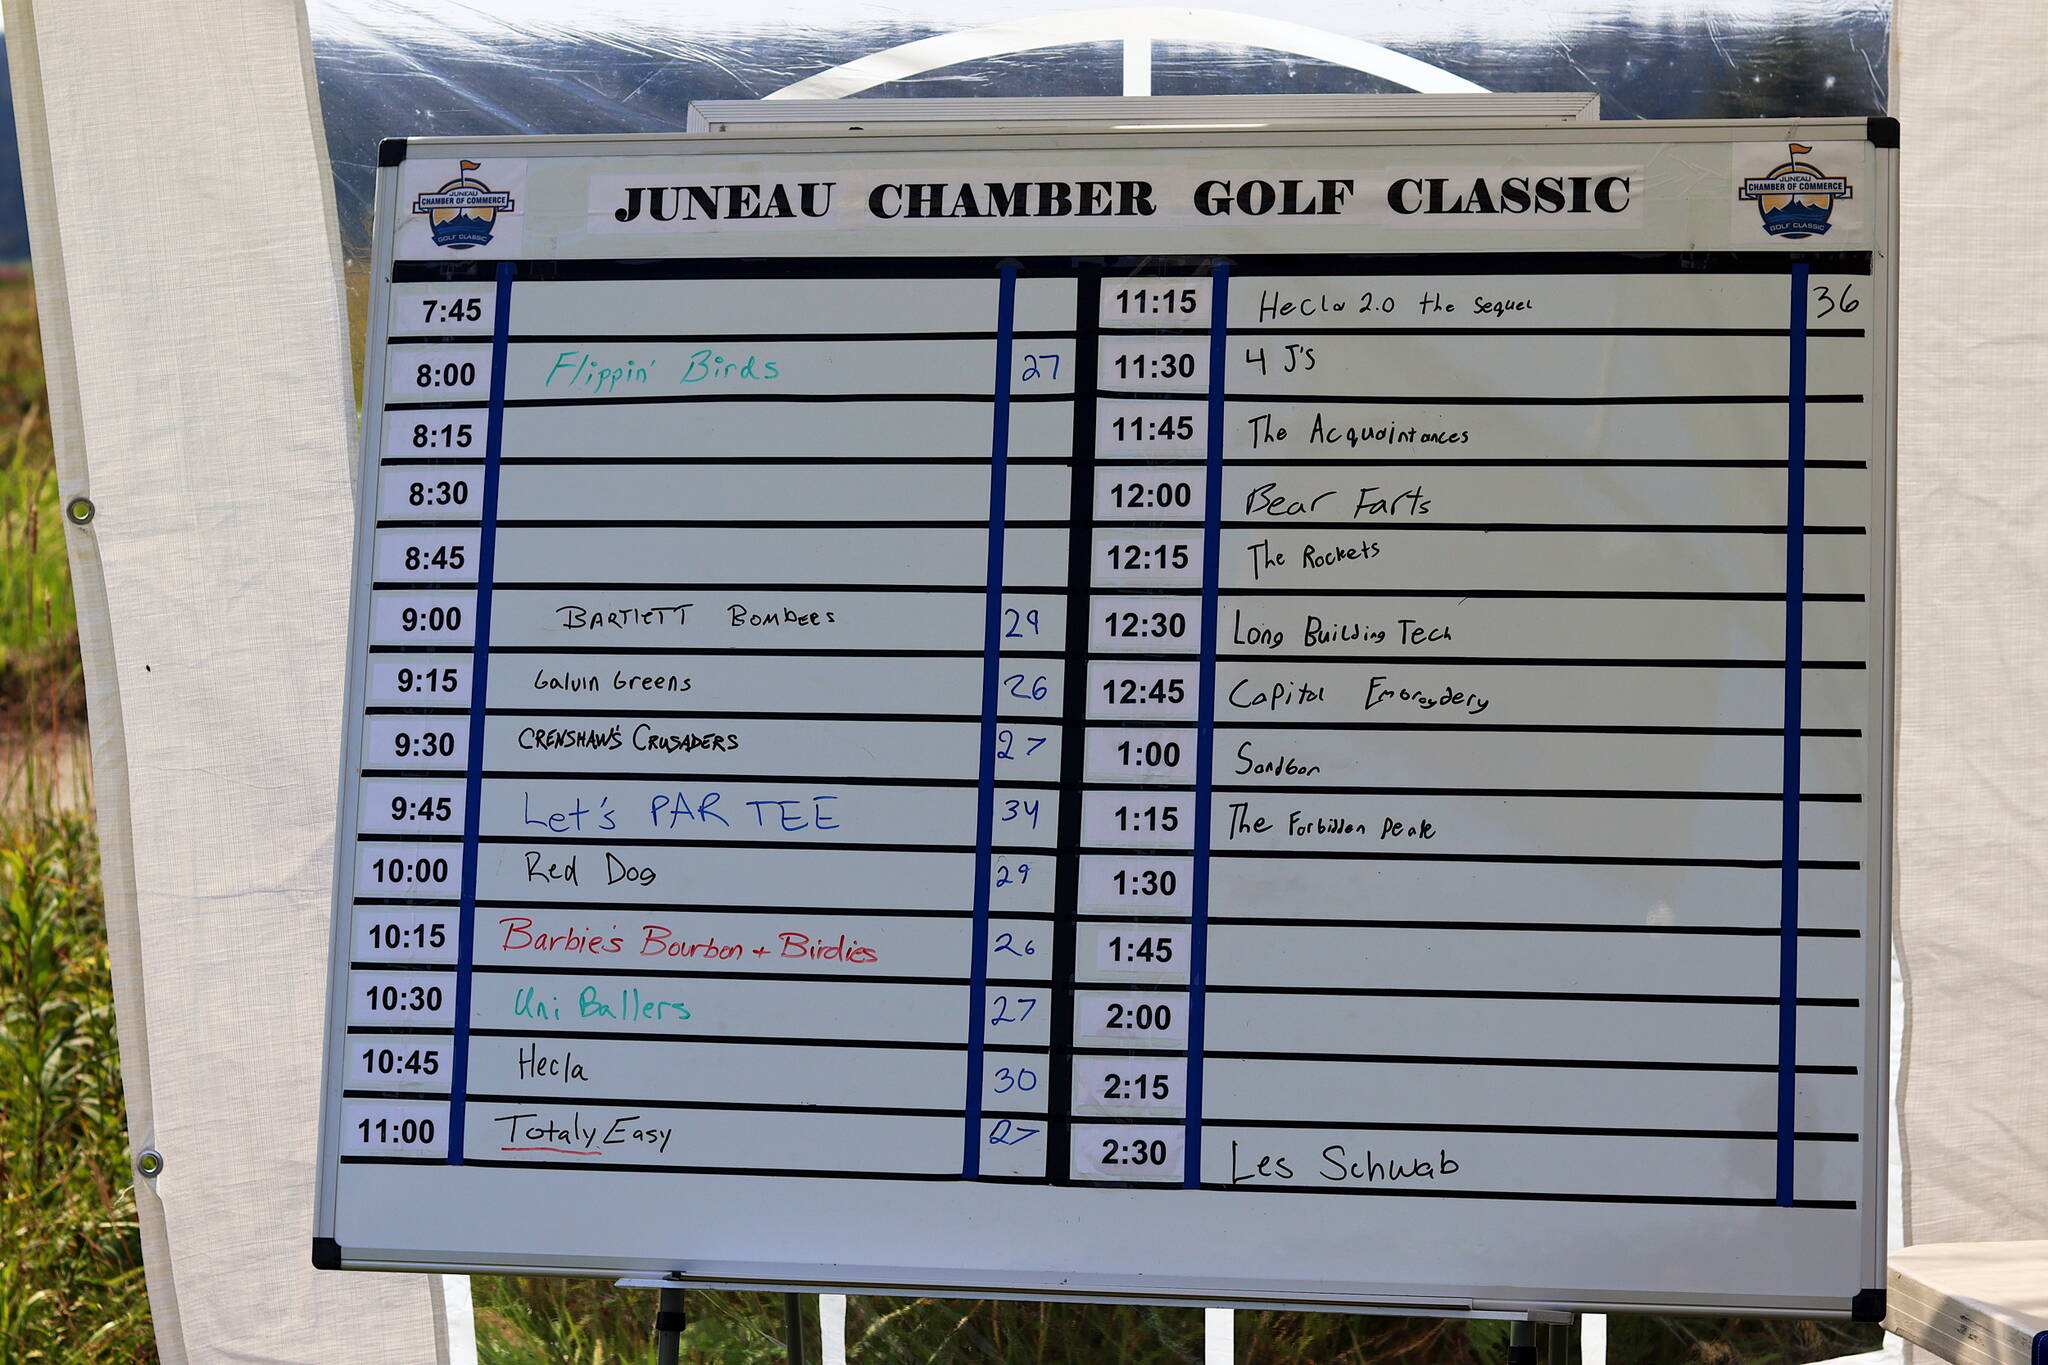 A scoreboard shows several at- or below-par scores for teams on the nine-hole, par-three Mendenhall Golf Course during the Annual Greater Juneau Chamber of Commerce Golf Classic on Saturday. The tournament was a best-ball competition where the lowest score of a team’s member counts for each hole, plus participants were able to purchase mulligans to negate unwanted shots. (Mark Sabbatini / Juneau Empire)